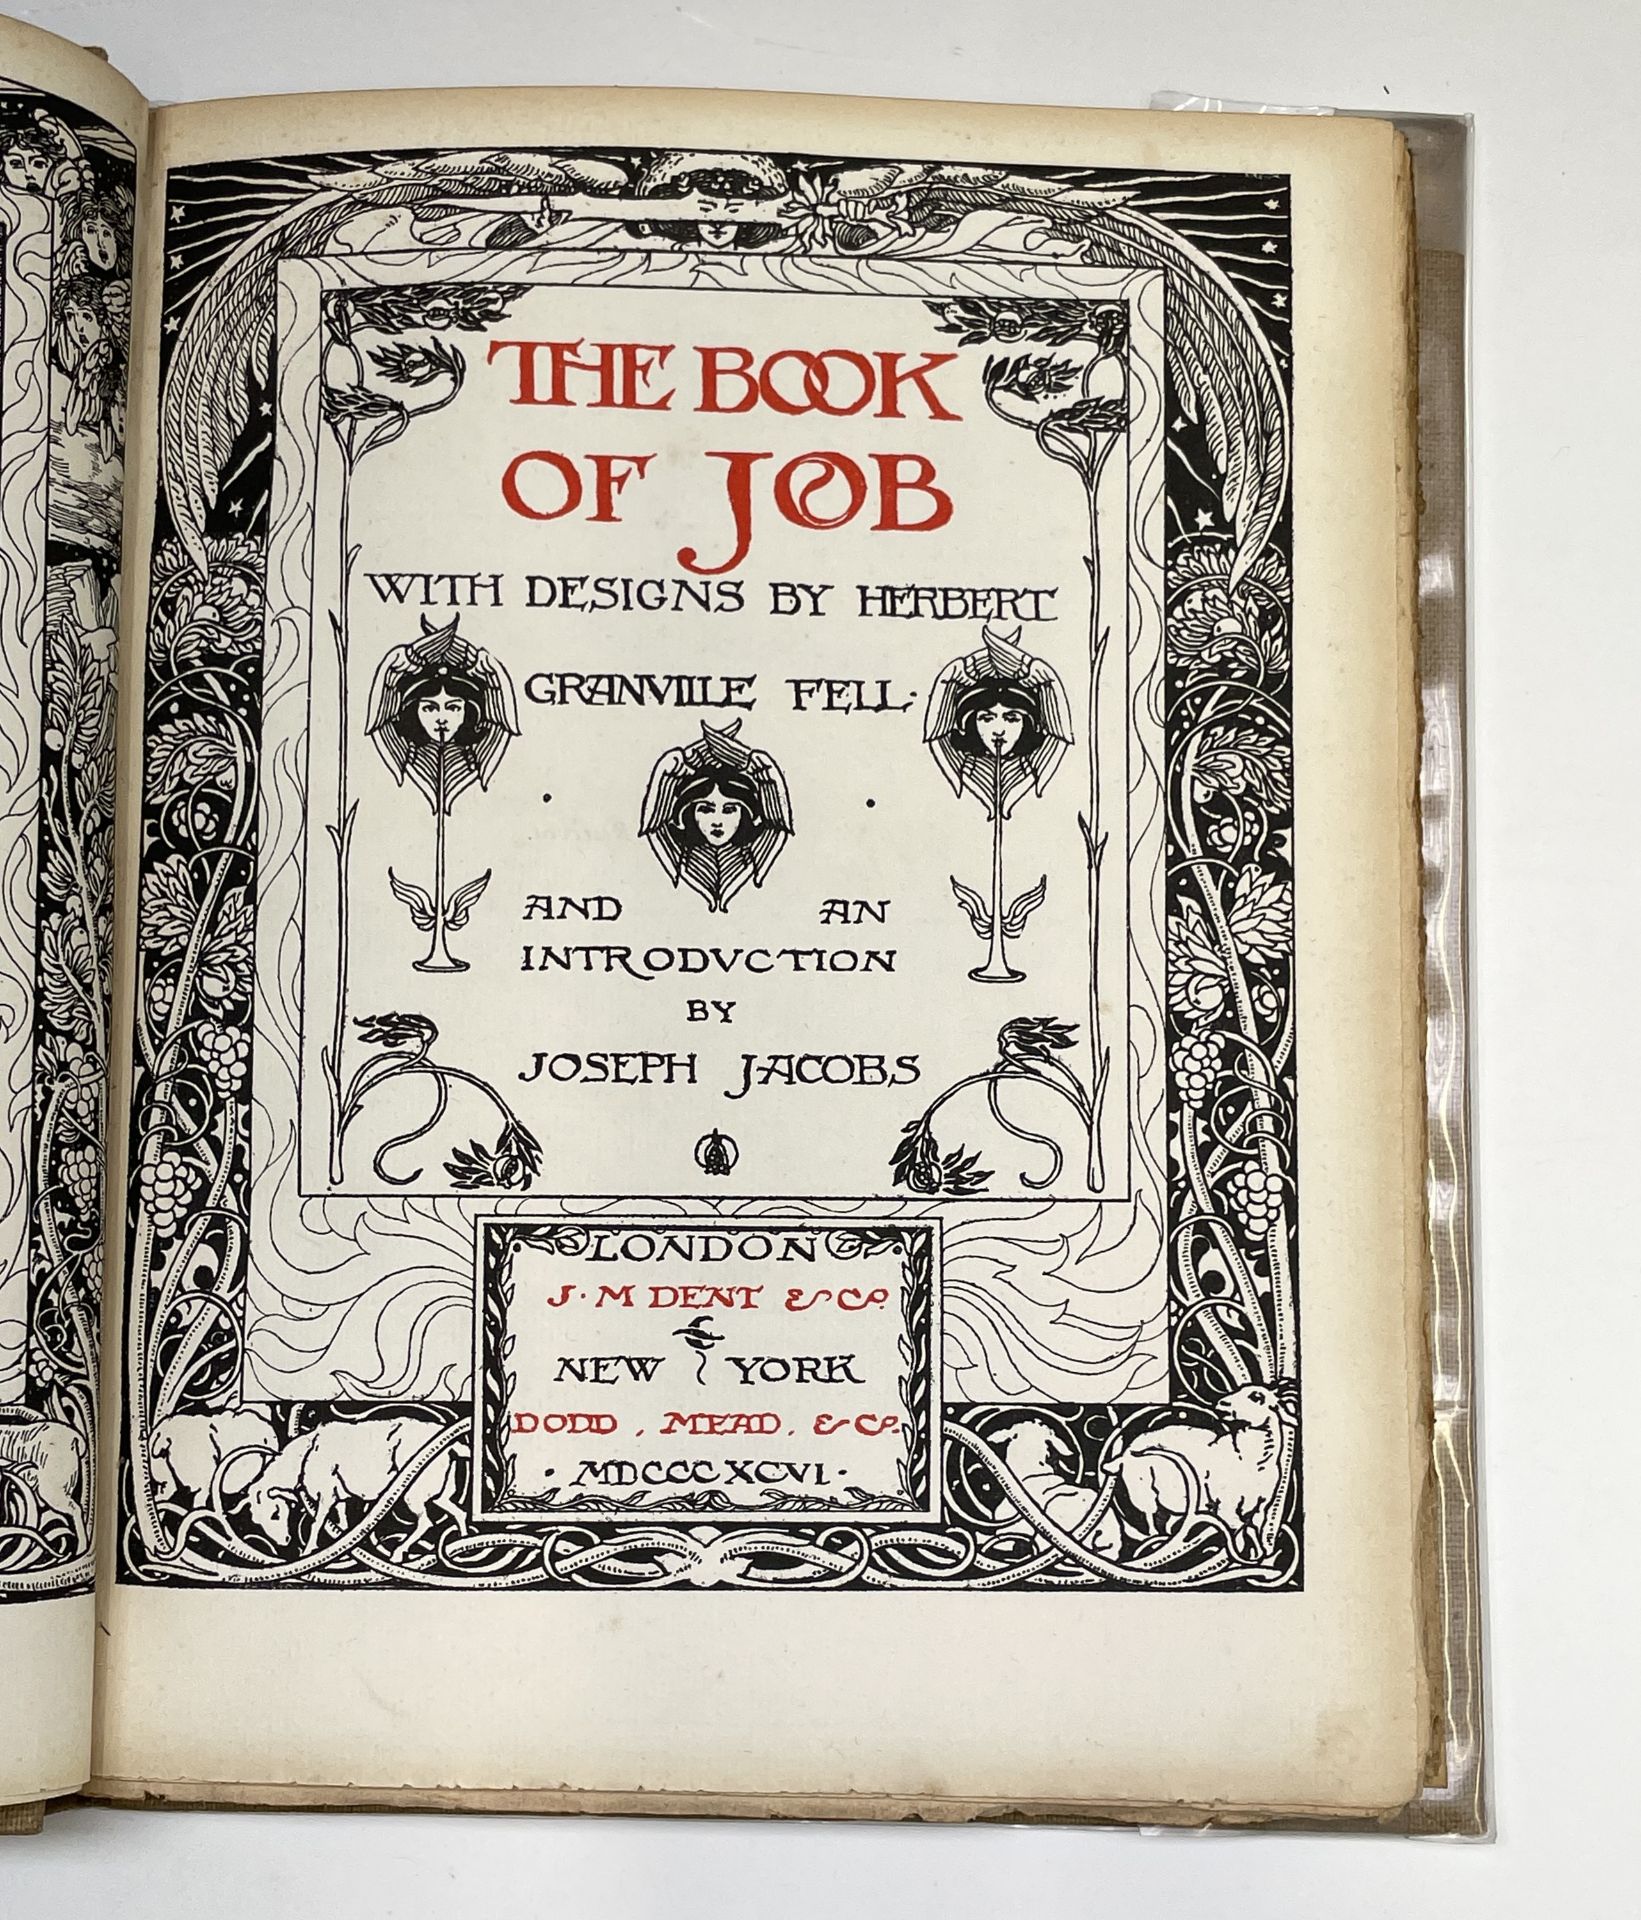 HERBERT GRANVILLE FELL. 'The Book of Job.' Introduction by Joseph Jacobs, fully illustrated with - Image 26 of 33